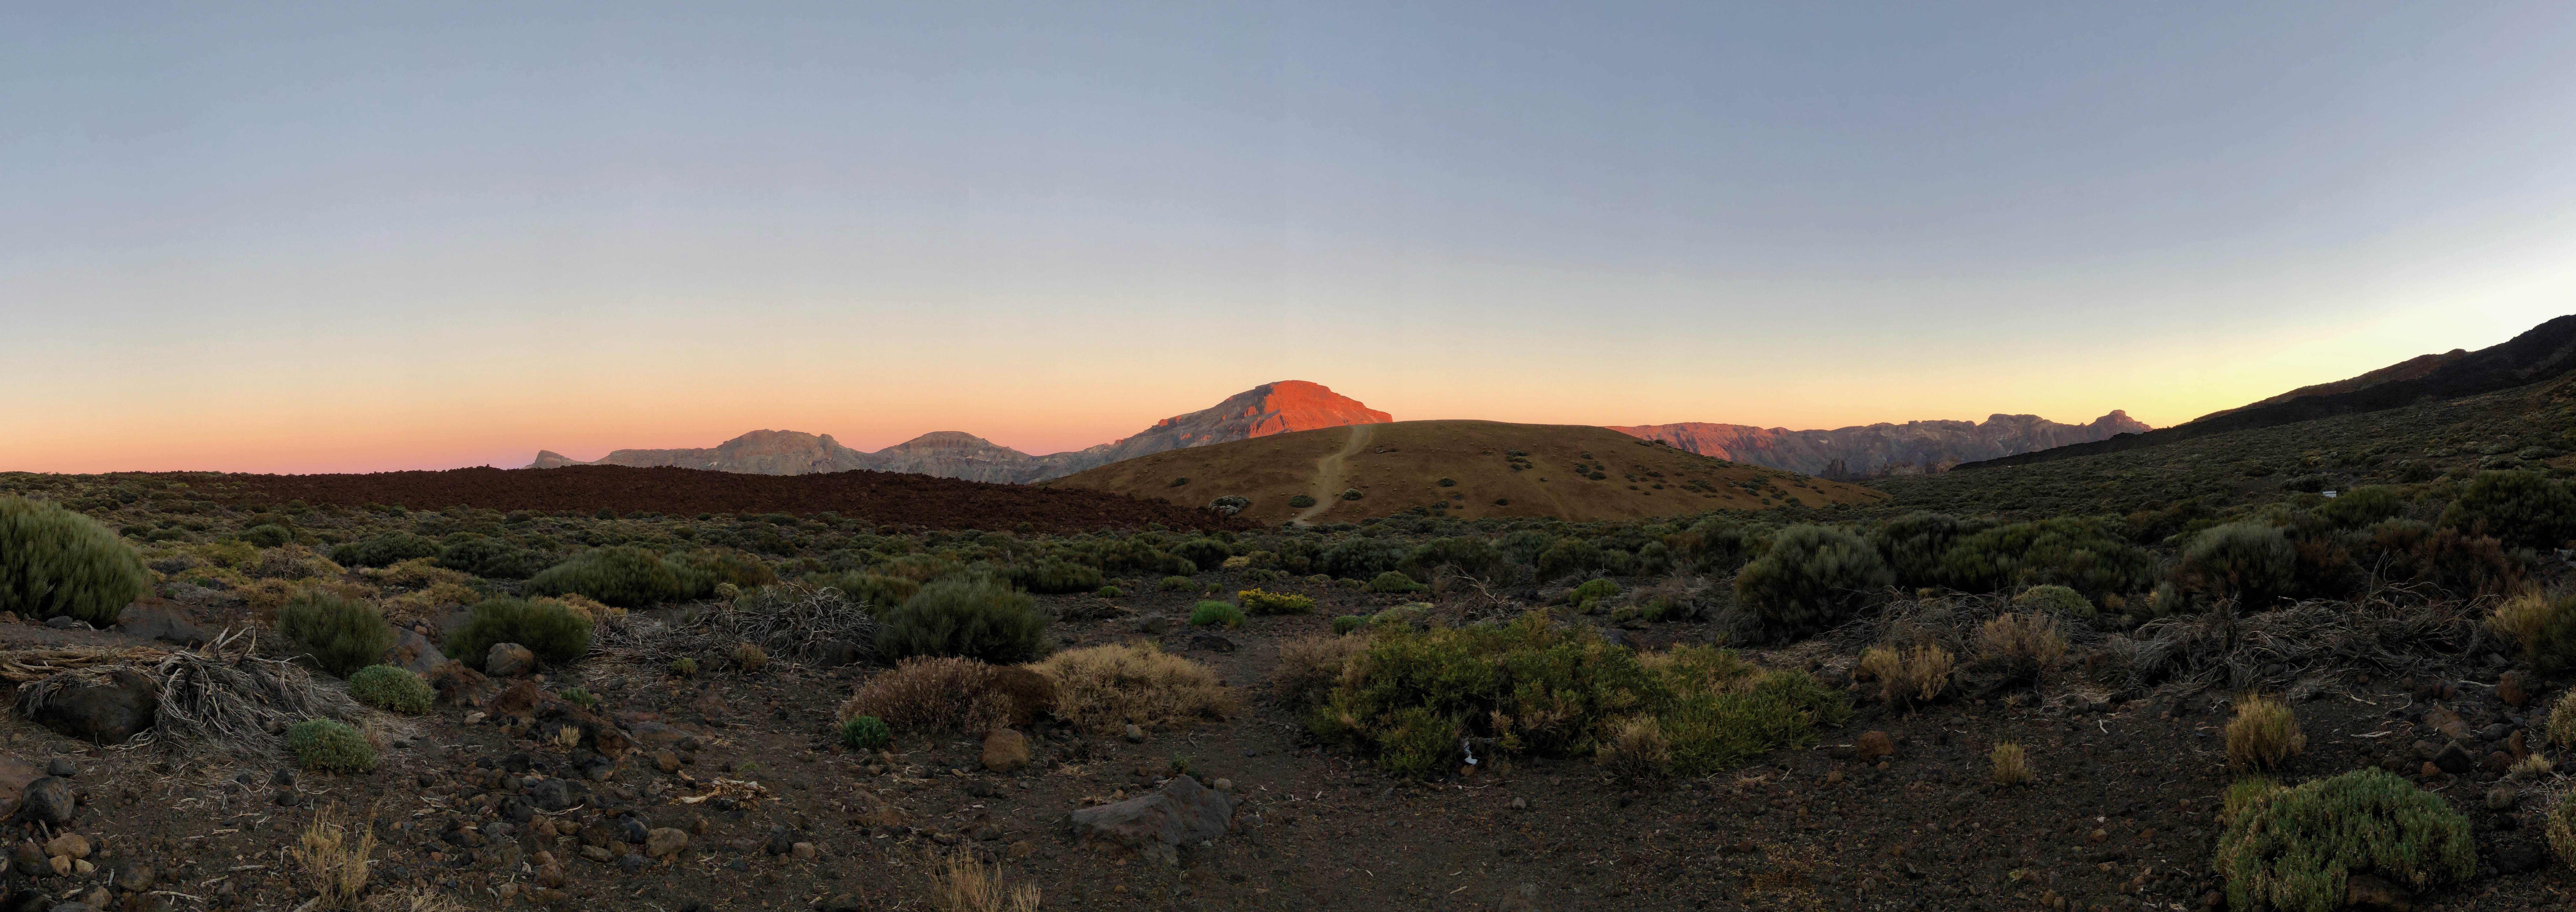 A panorama from the base of the Teide volcano.